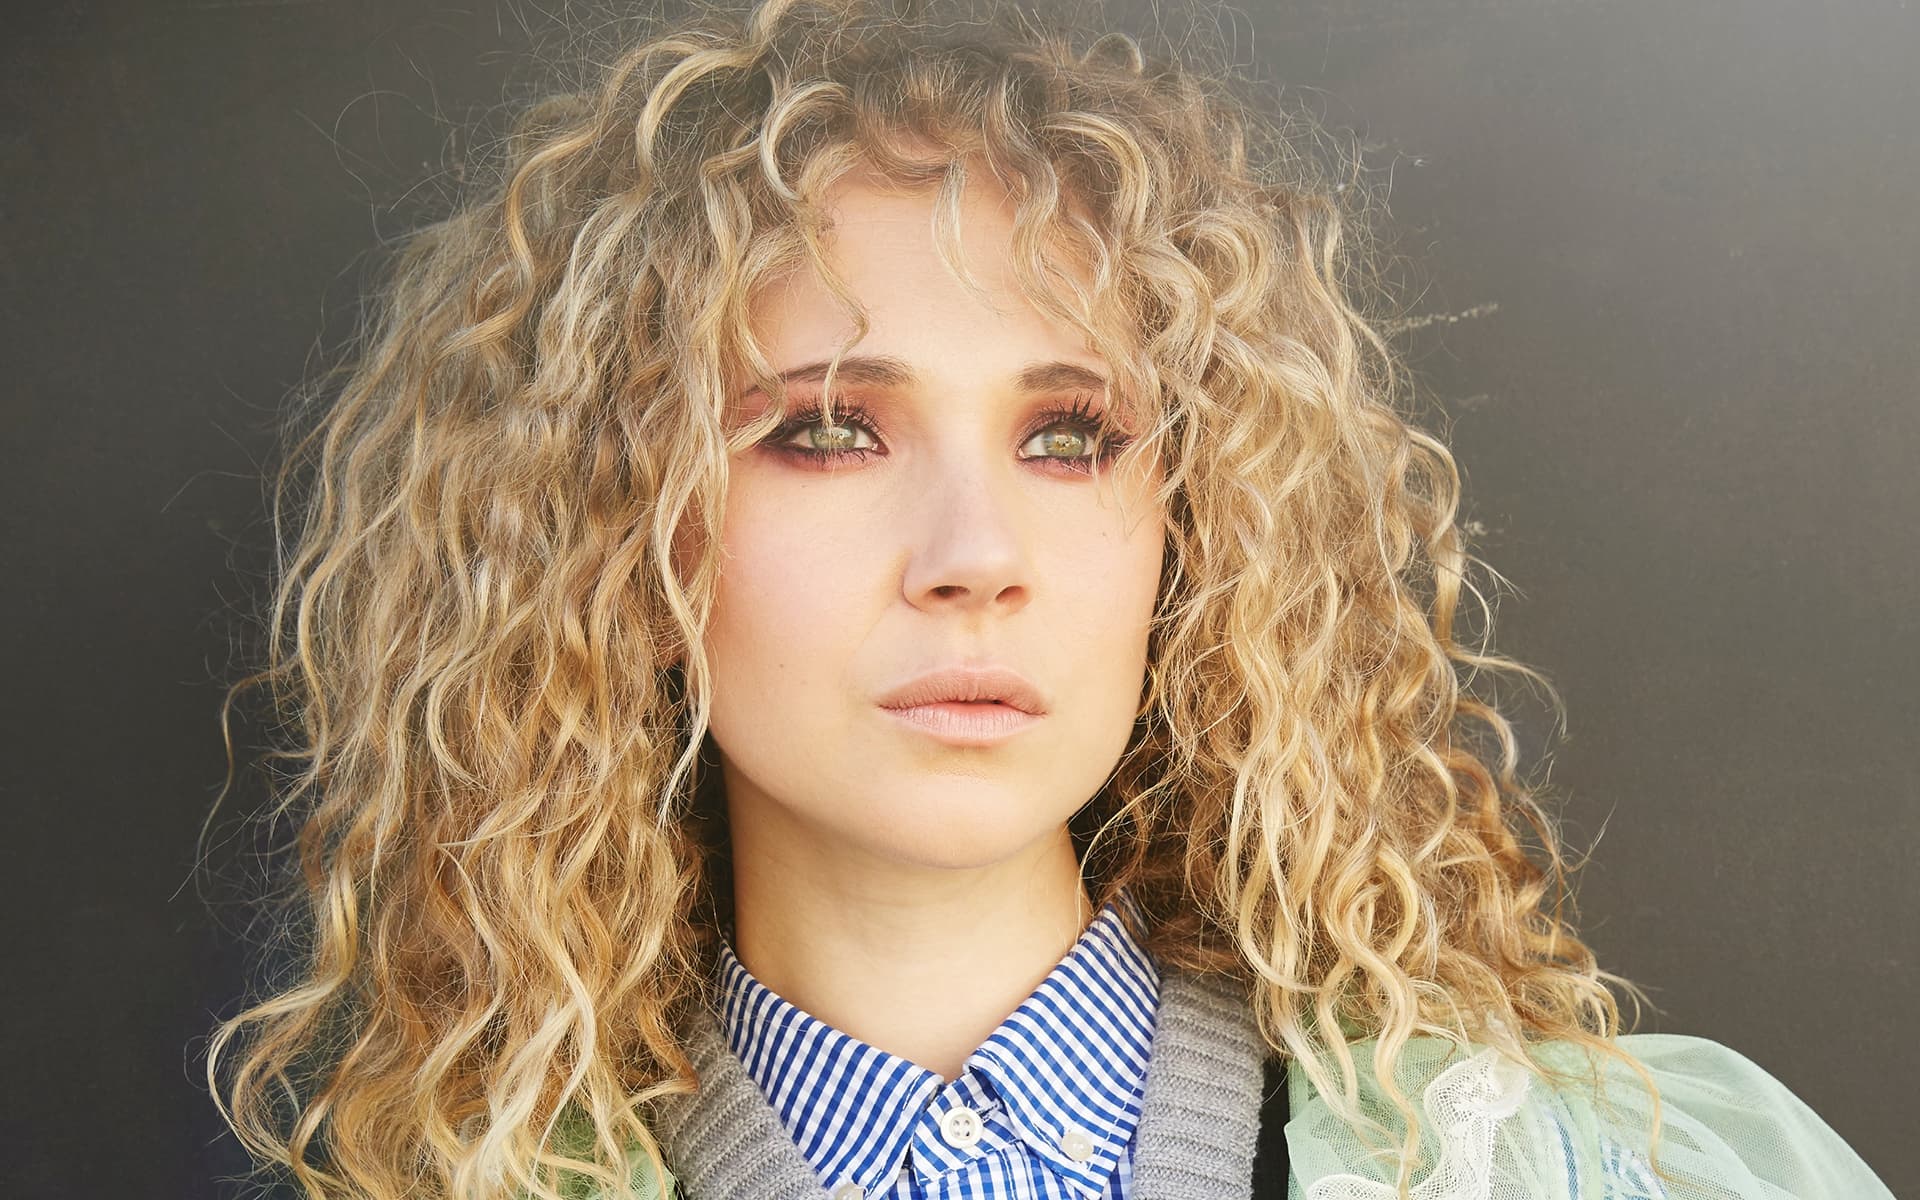 celebrity, juno temple, actress, blonde, face, green eyes